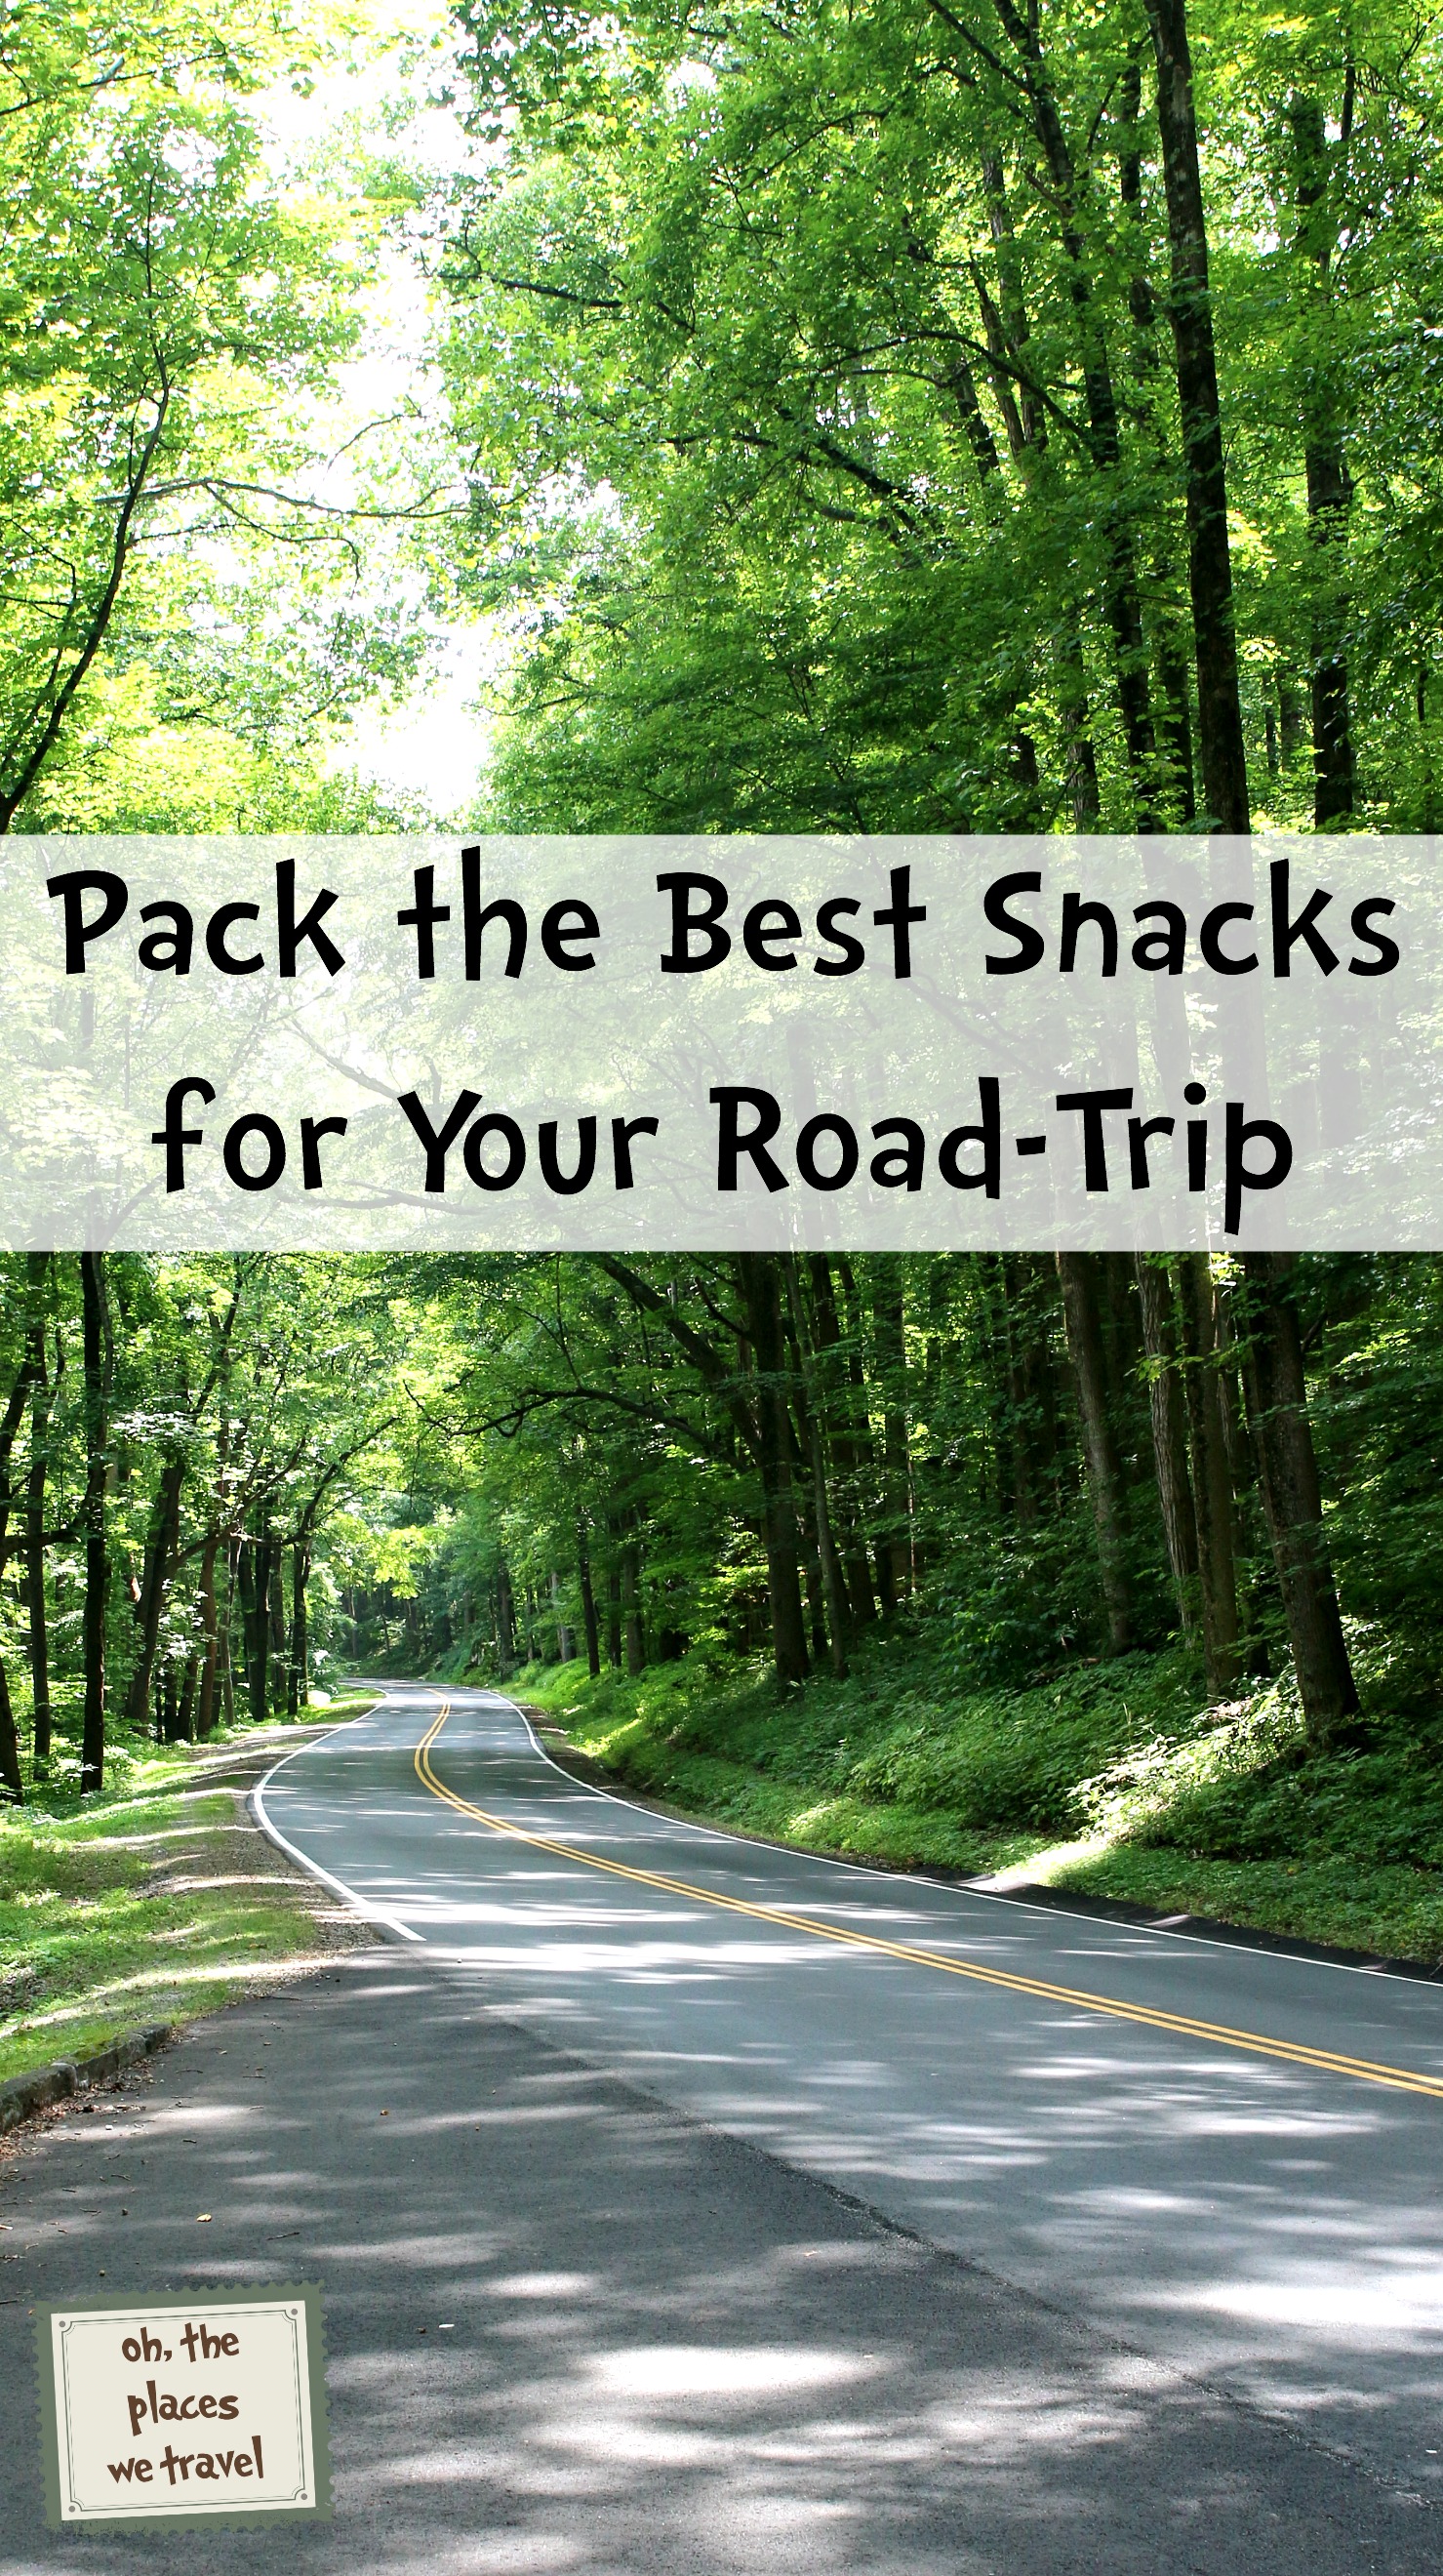 Pack the Best Snacks for Your Road-Trip